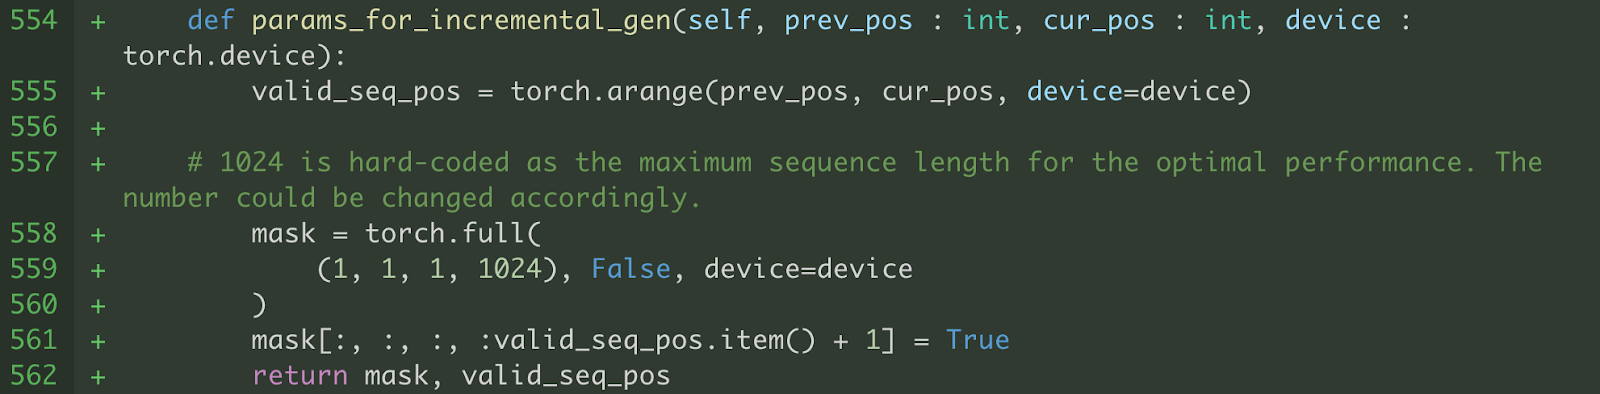 Helper function to generate valid_seq_pos and mask